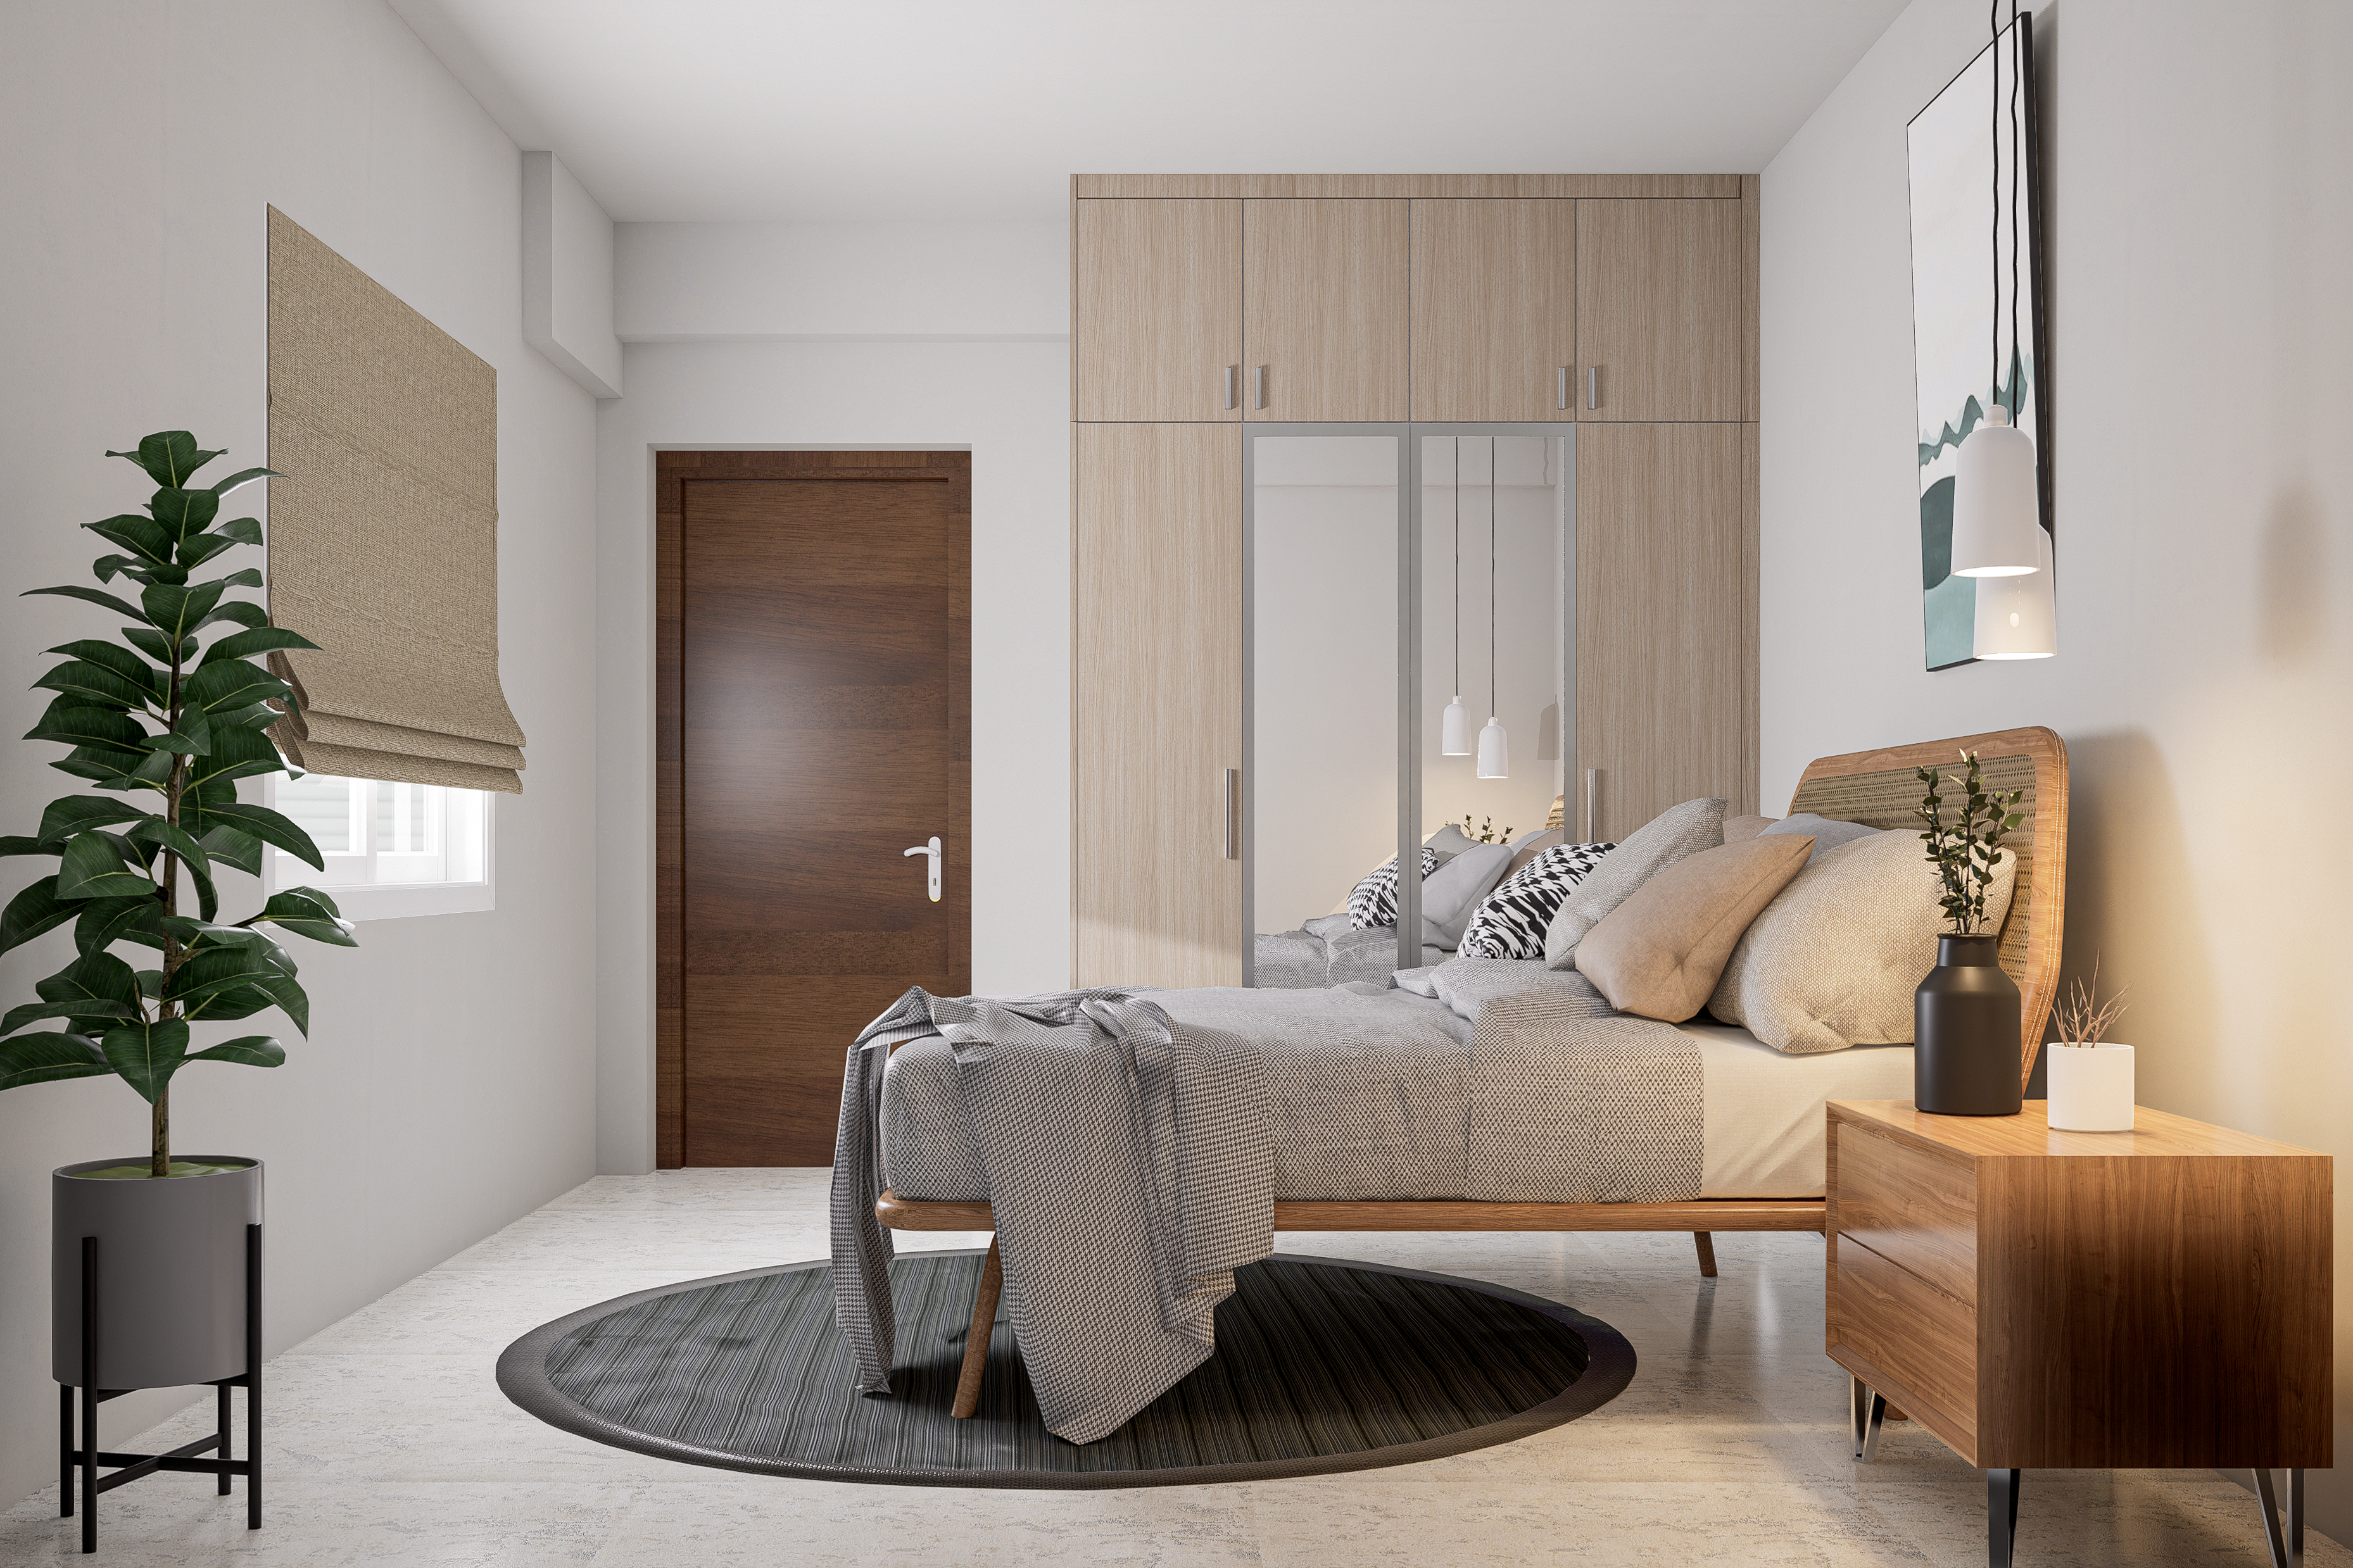 Minimal Master Bedroom Design In White And Wood